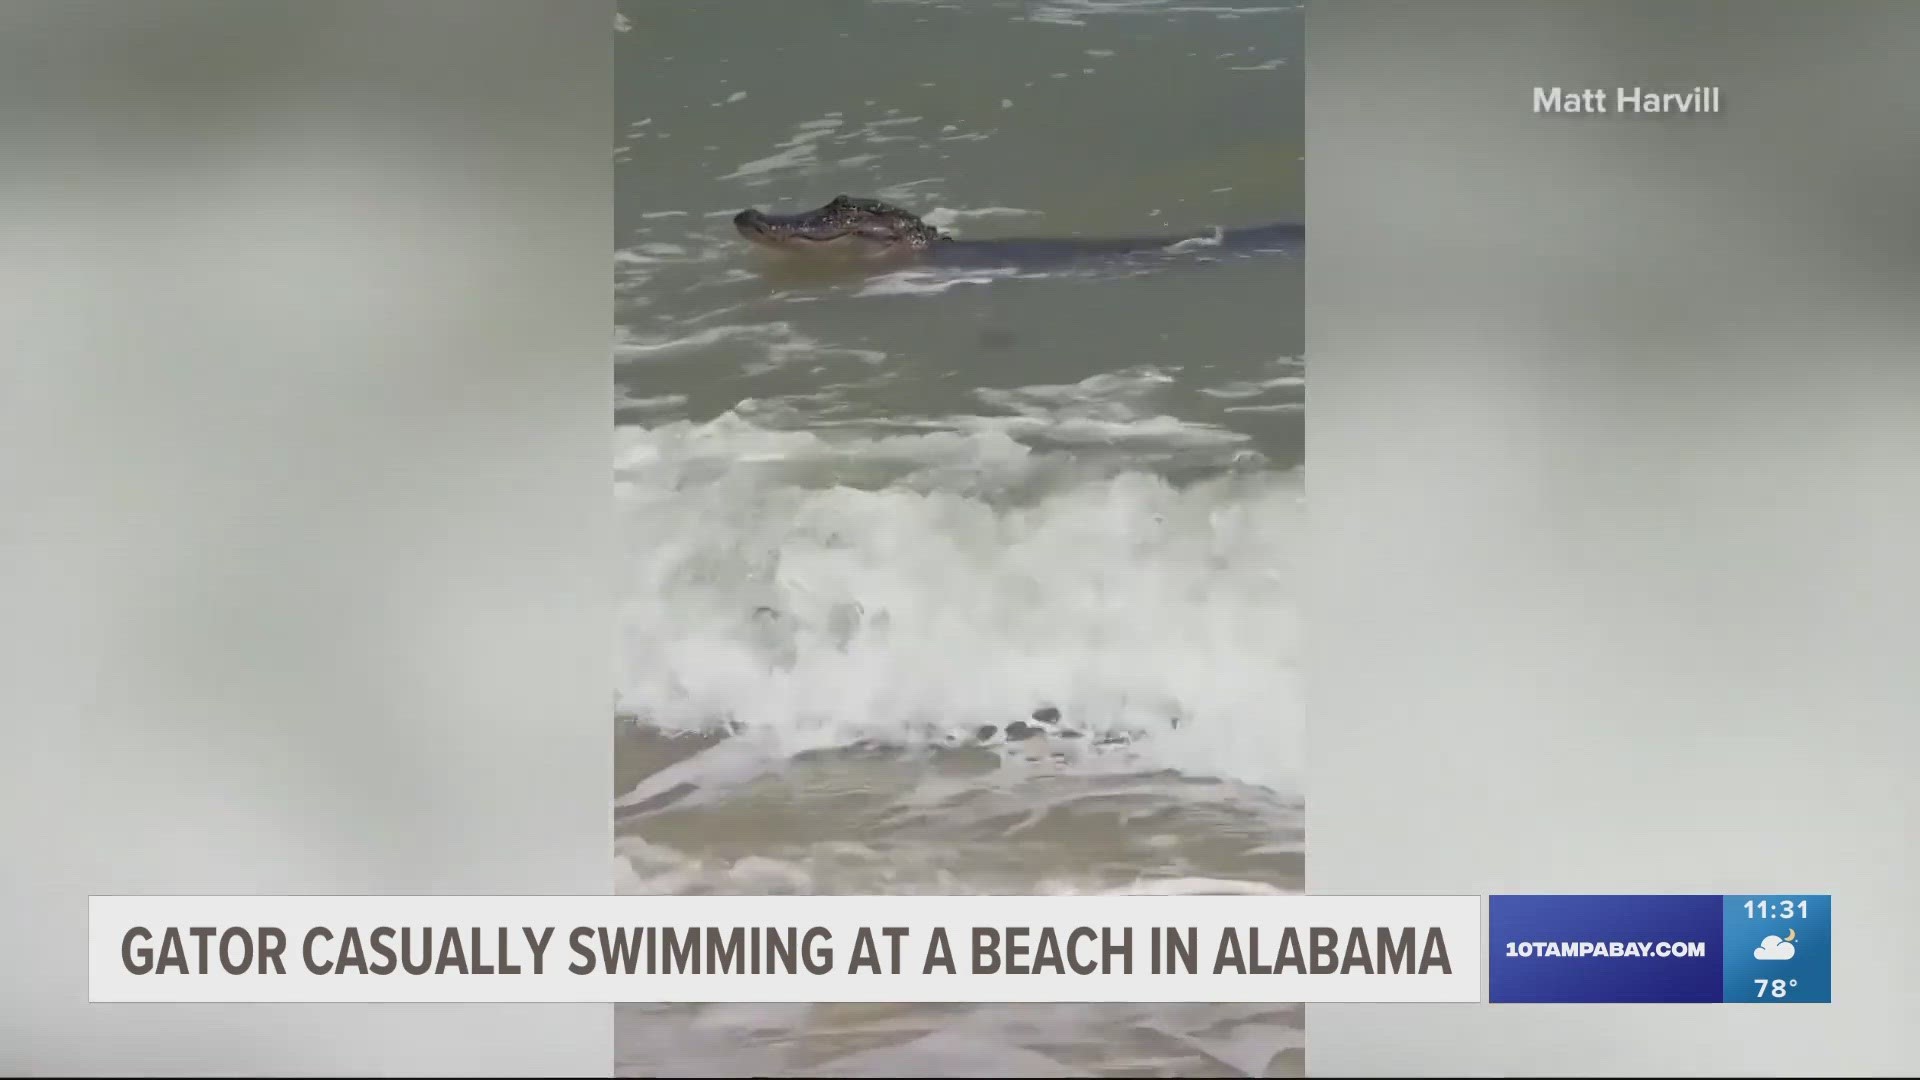 "It seemed like it was kind of spectating and seeing what was going on," a beachgoer said.